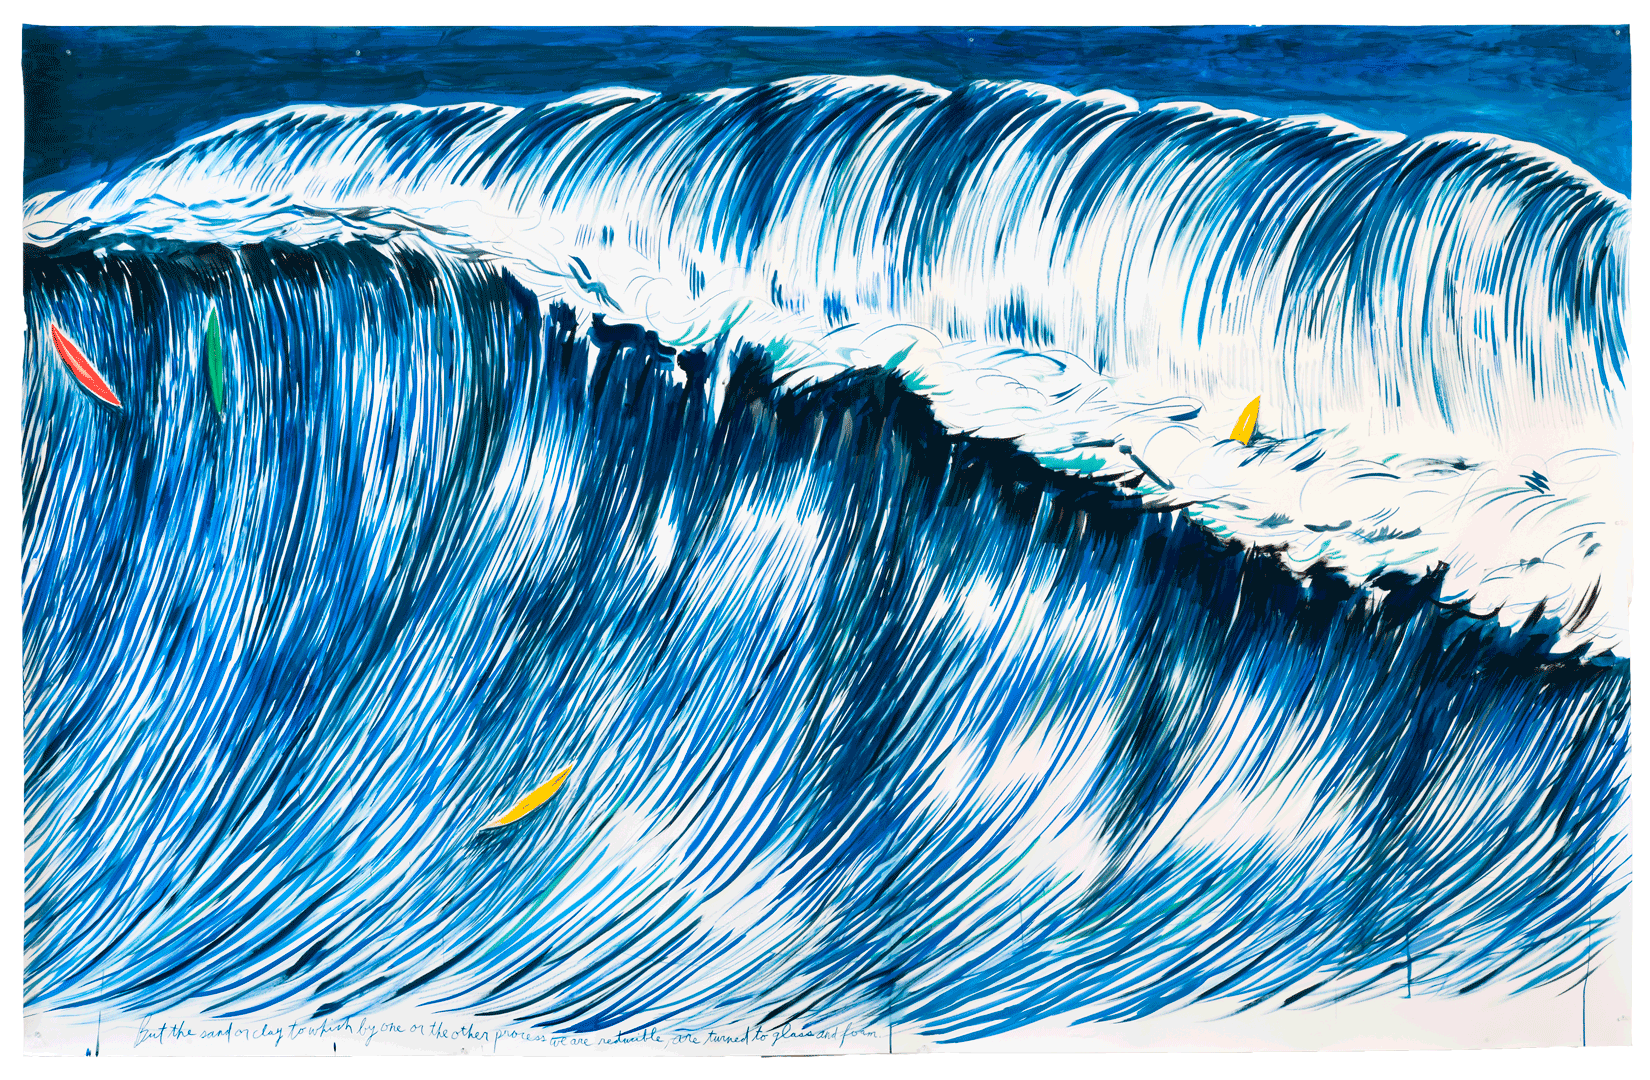 A drawing by Raymond Pettibon titled No Title (But the sand...), dated 2011.